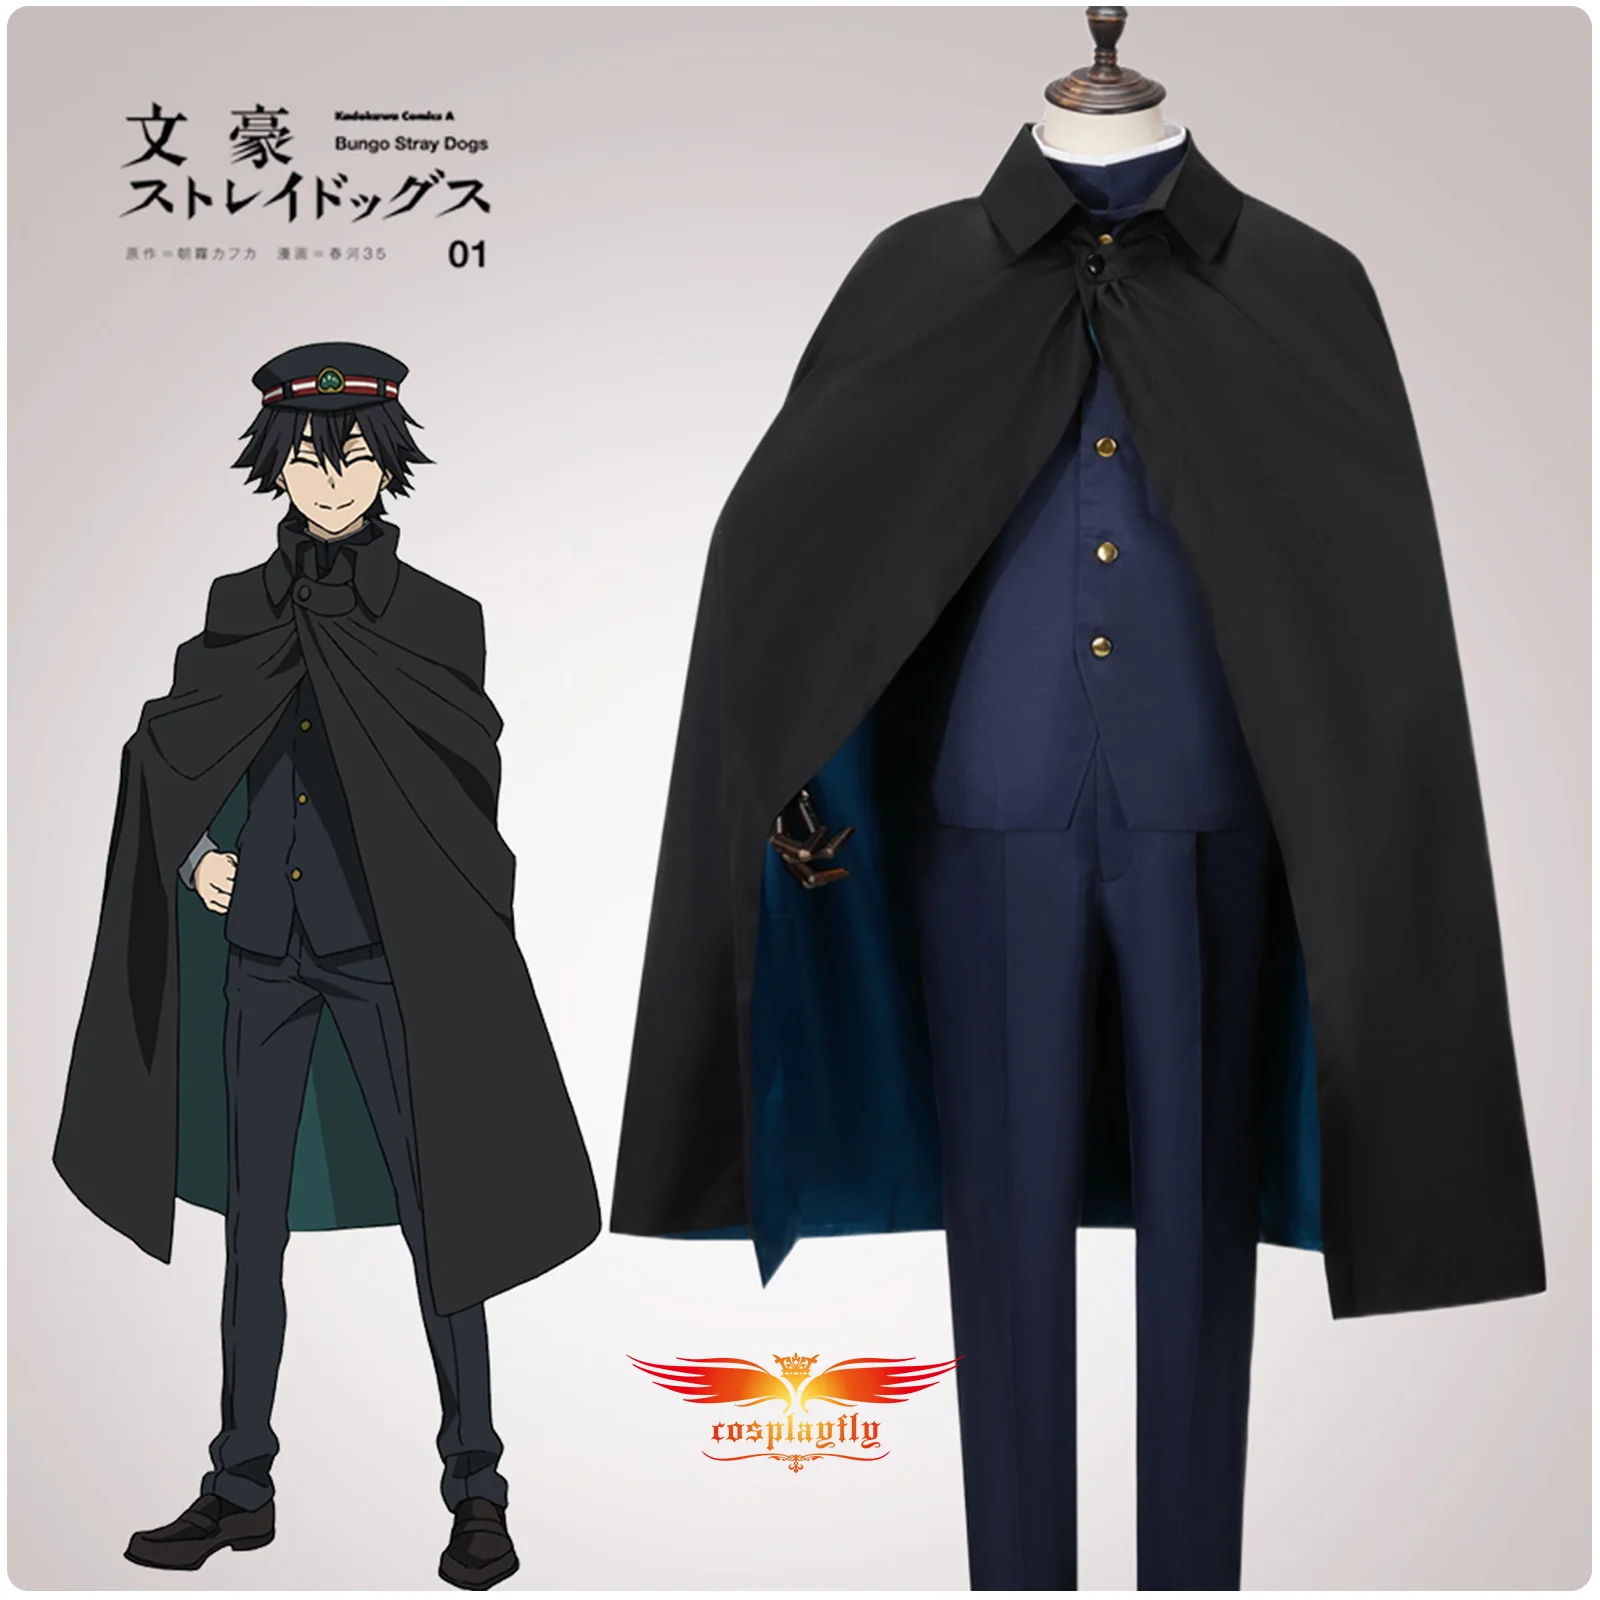 

Anime Bungou Stray Dogs Edogawa Ranpo Cosplay Costume for Adult Men Male Navy Blue Jacket Uniform Outfits with Cloak Halloween